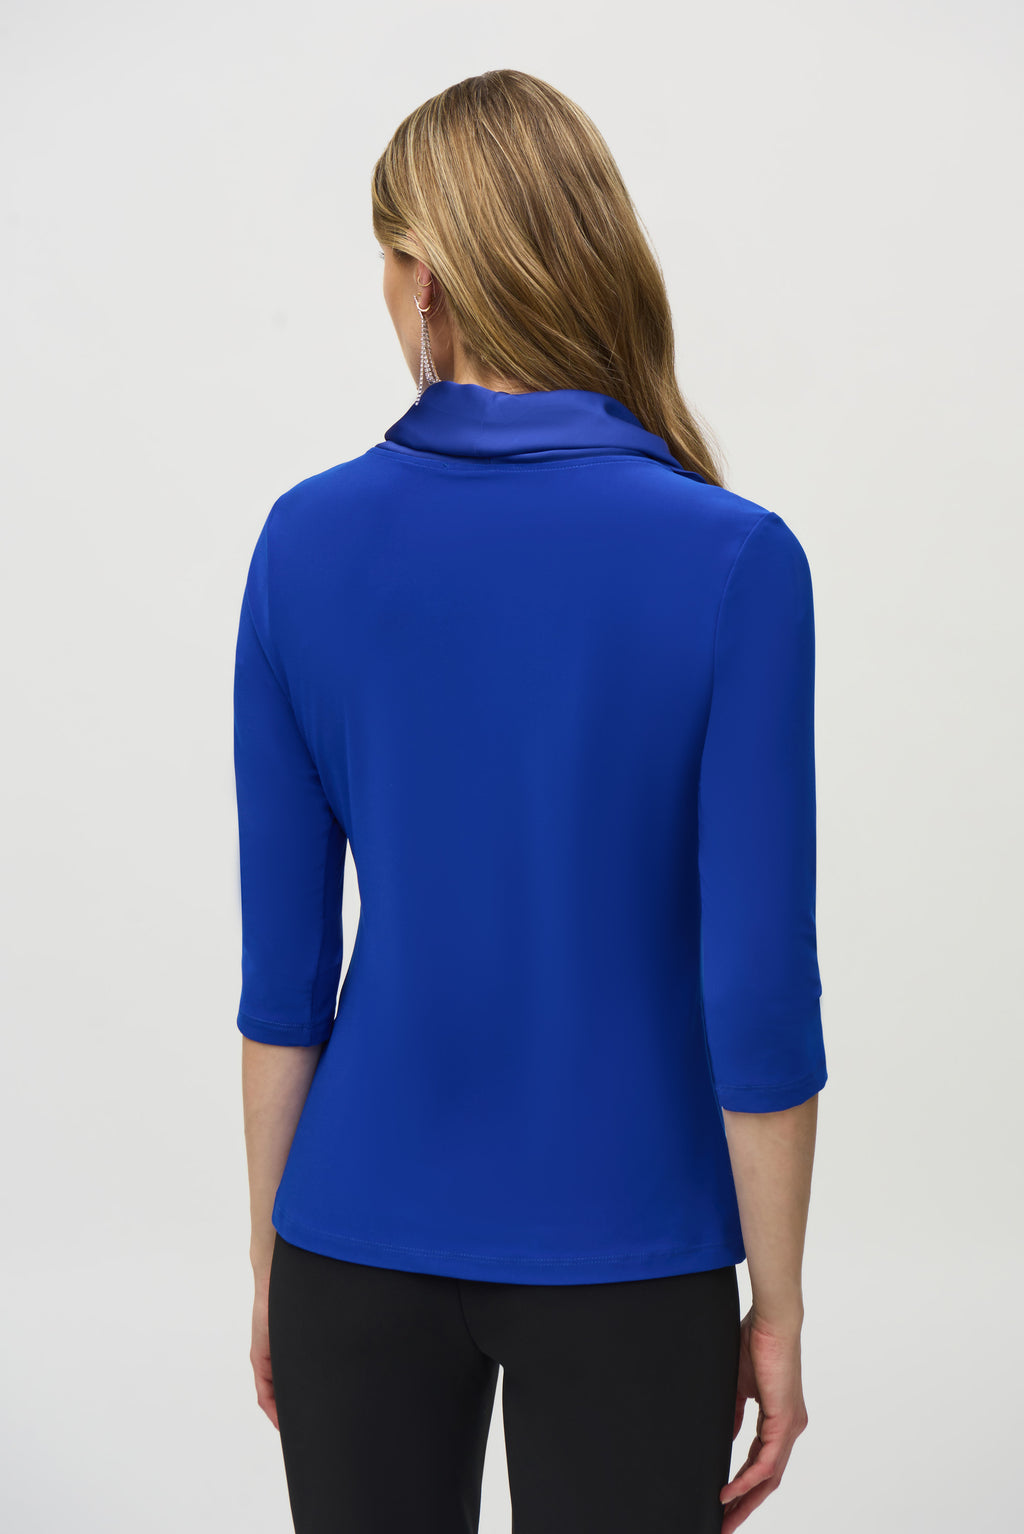 Joseph Ribkoff Royal Sapphire Cowl Neck Fitted Top Style 244106